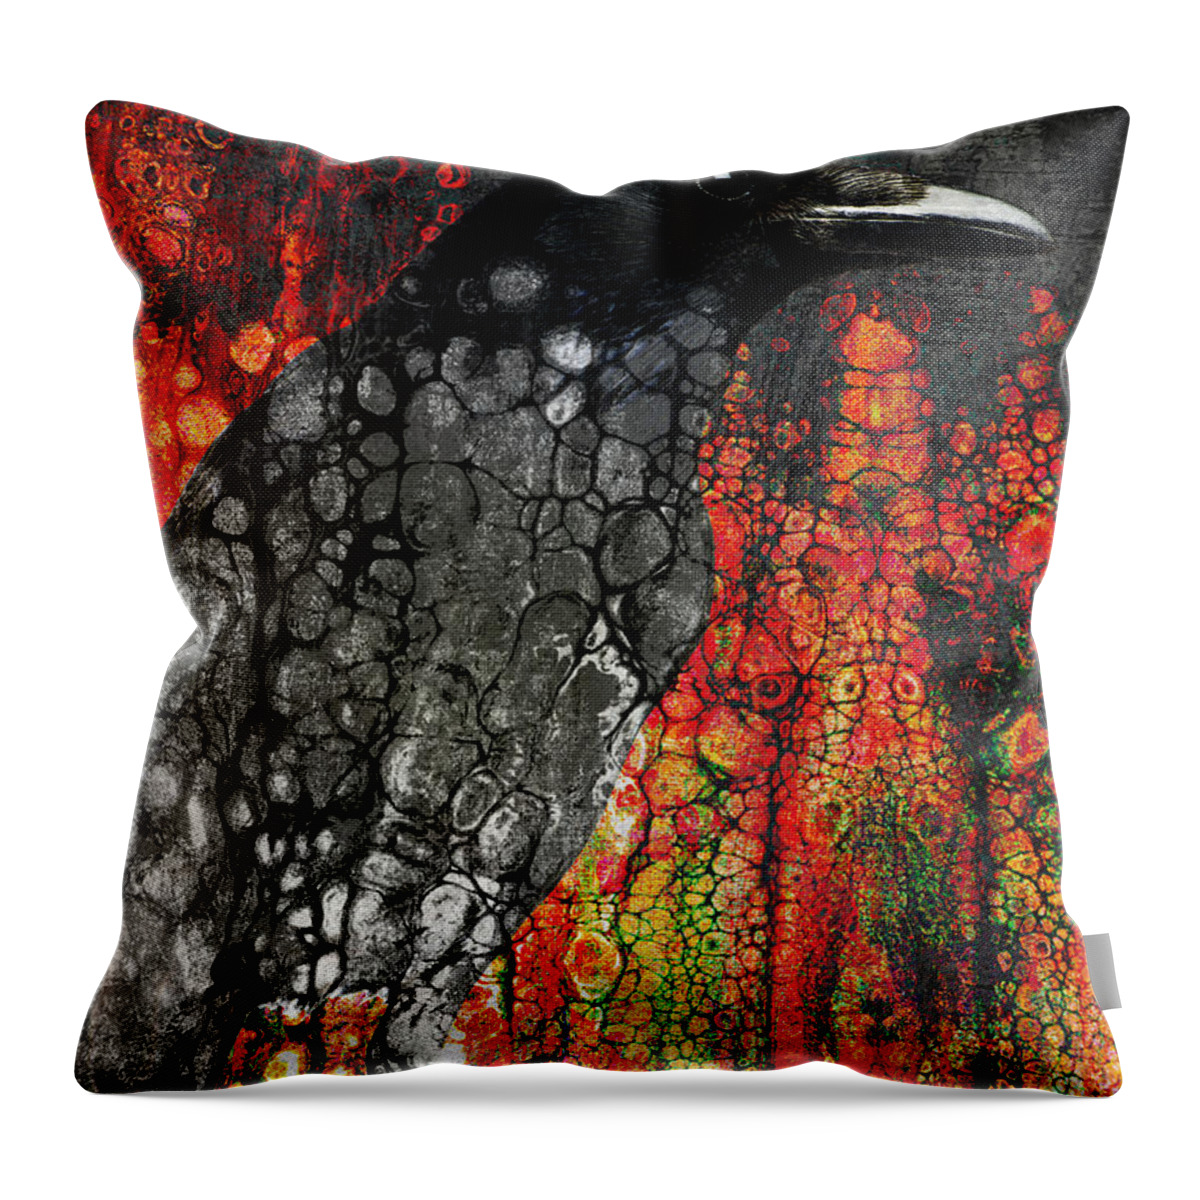 Raven Throw Pillow featuring the digital art Raven Semi Abstract by Sandra Selle Rodriguez